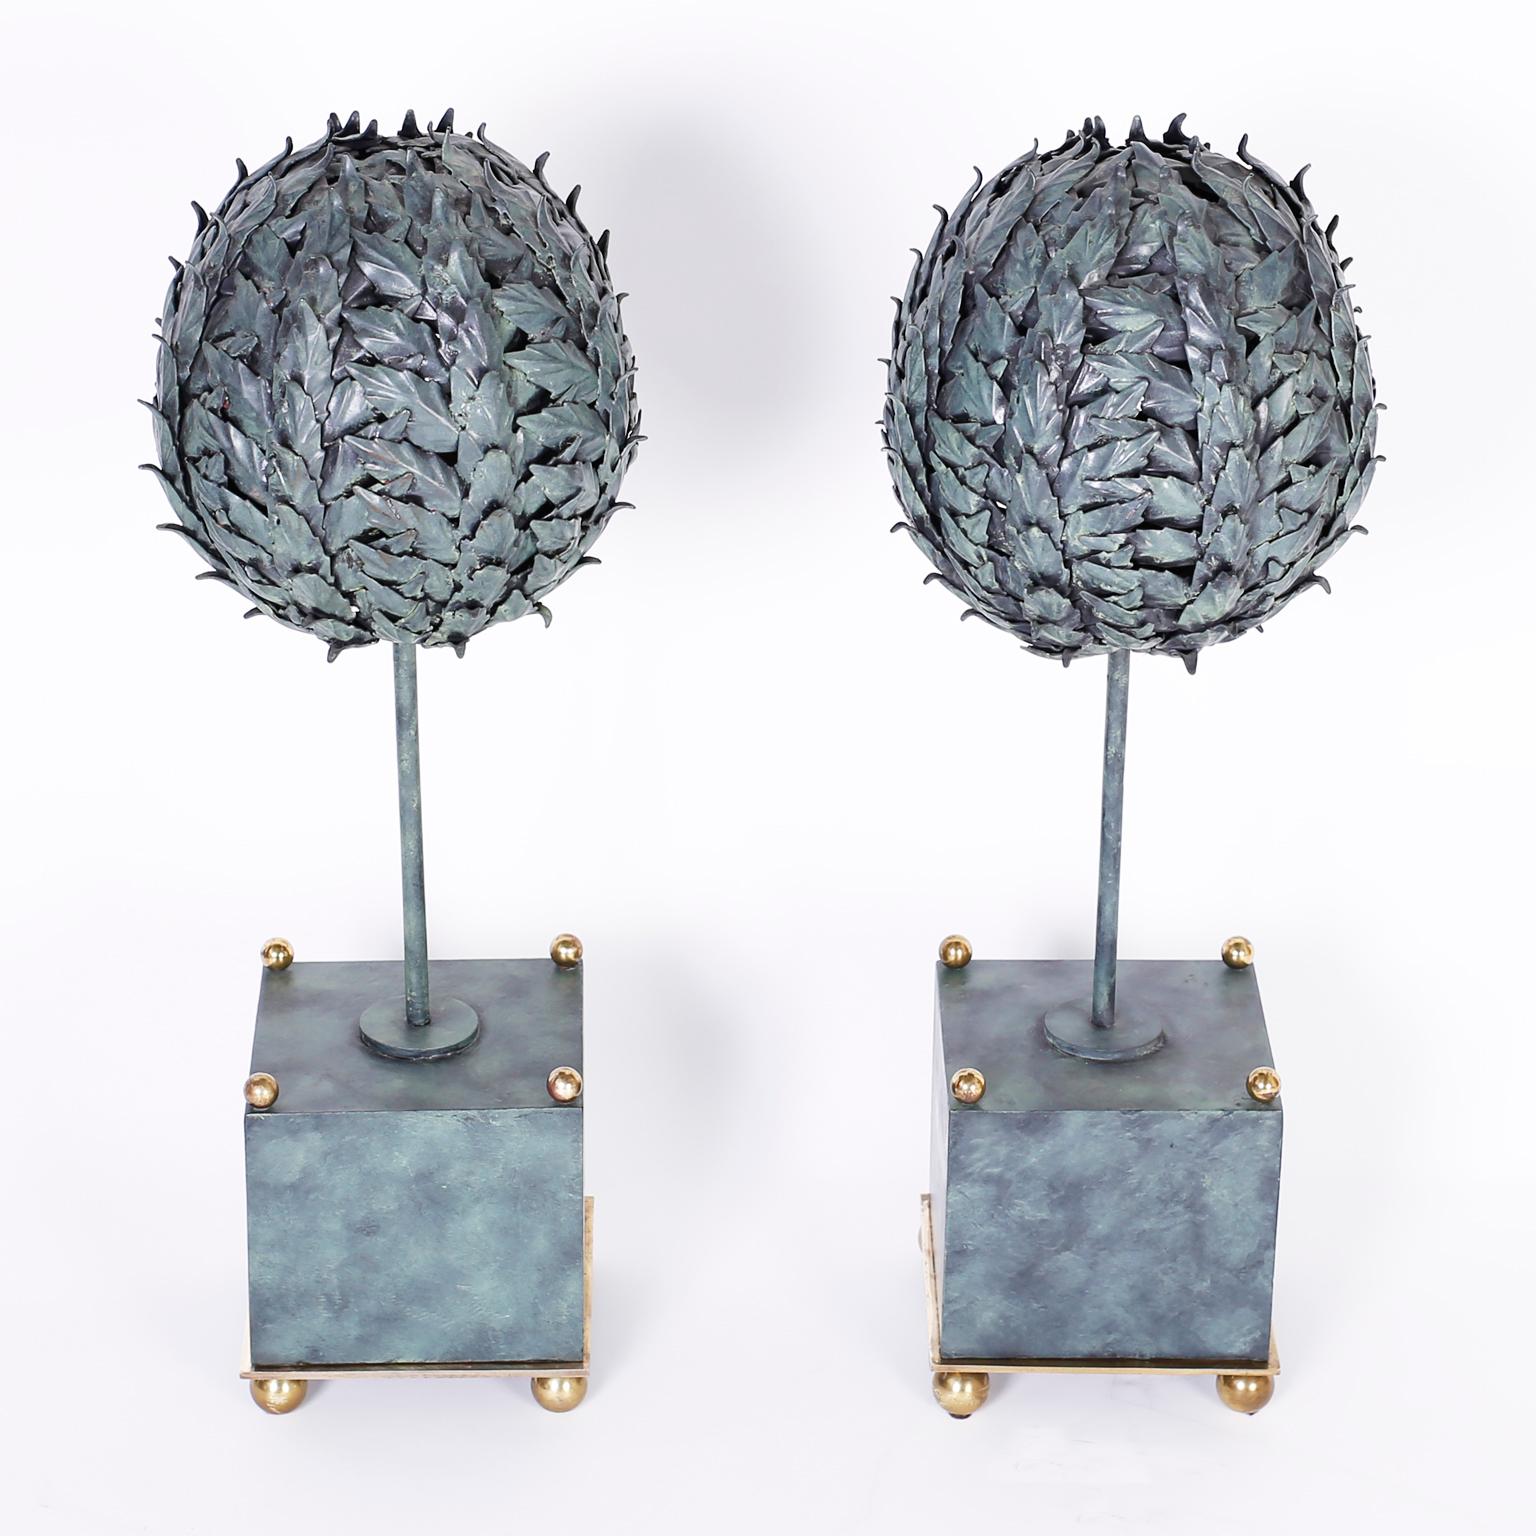 Midcentury tole or painted metal topiaries depicting round trimmed trees in square planters with brass ball finials and feet. Signed Maitland-Smith on the bottom.